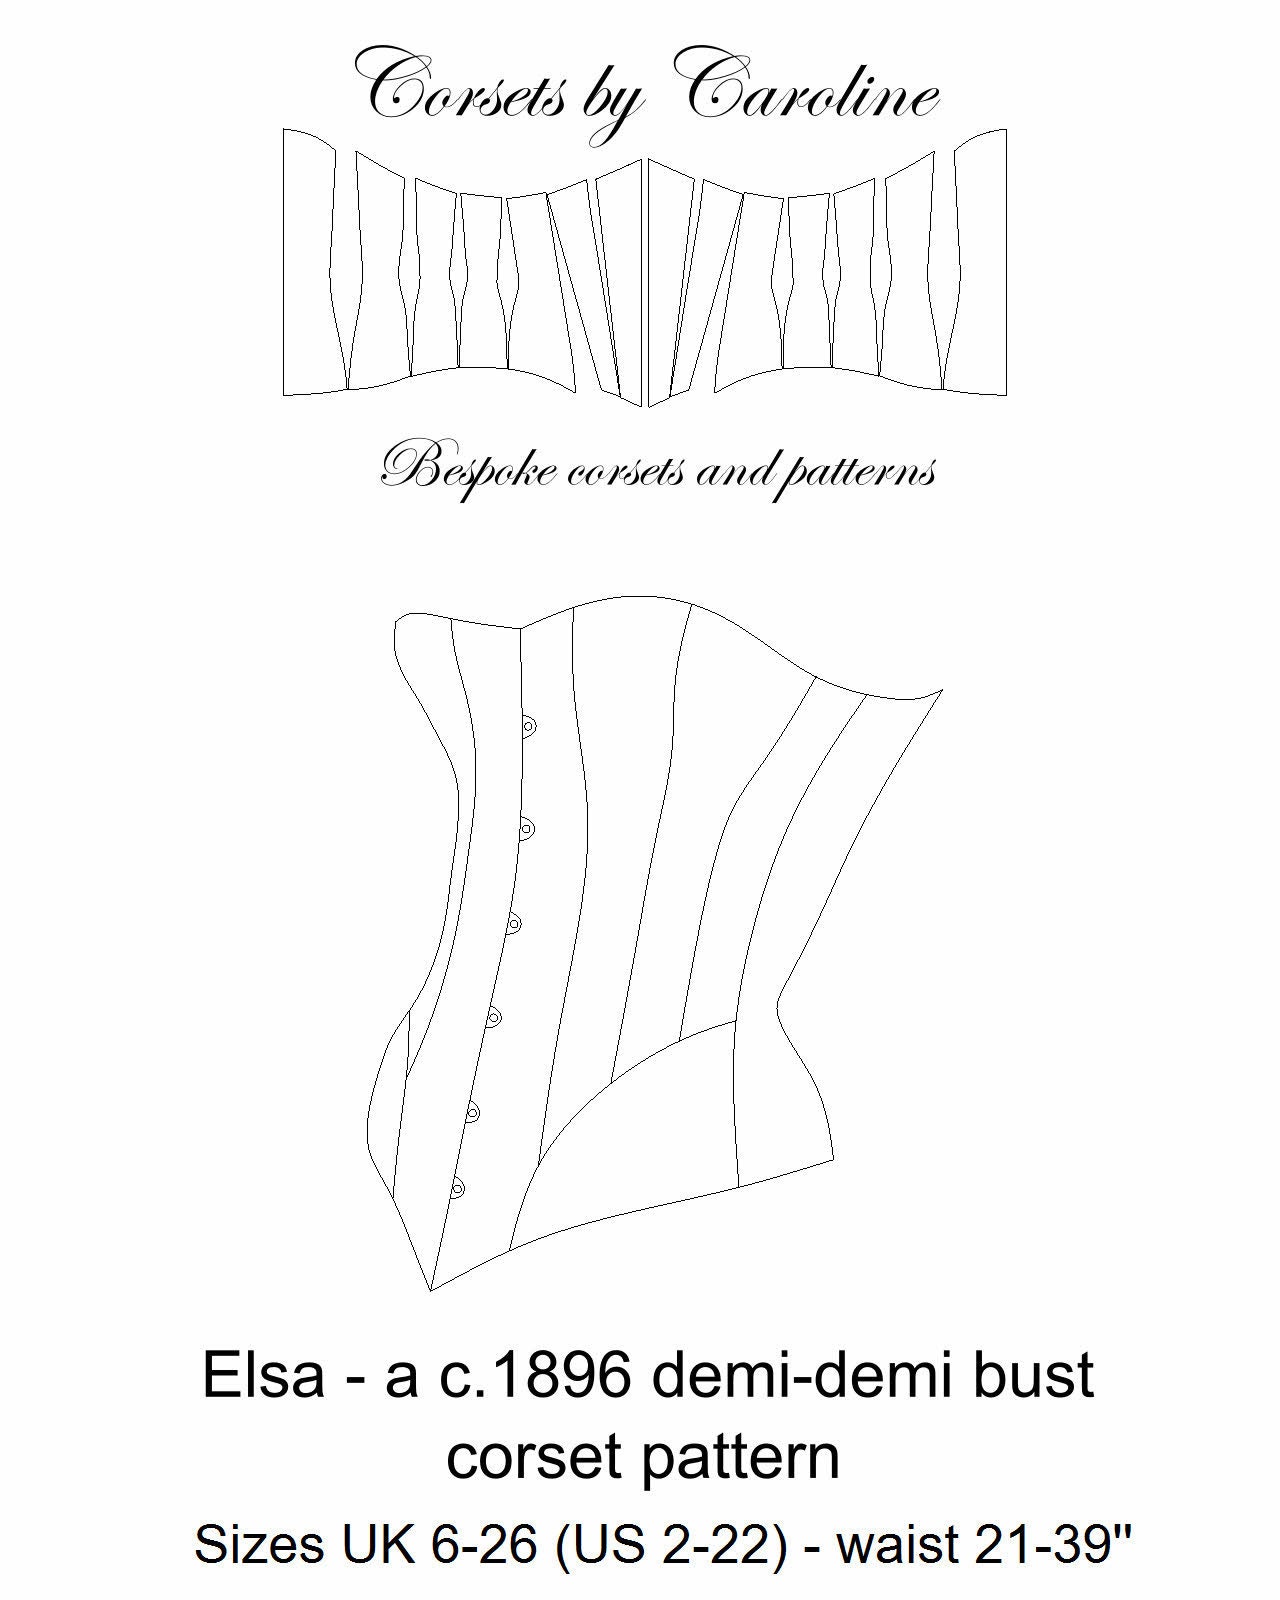 REF K PDF Digital File Pattern From Antique Edwardian Corset for Seamstress  Reproduction 21 Inches Waist Size 